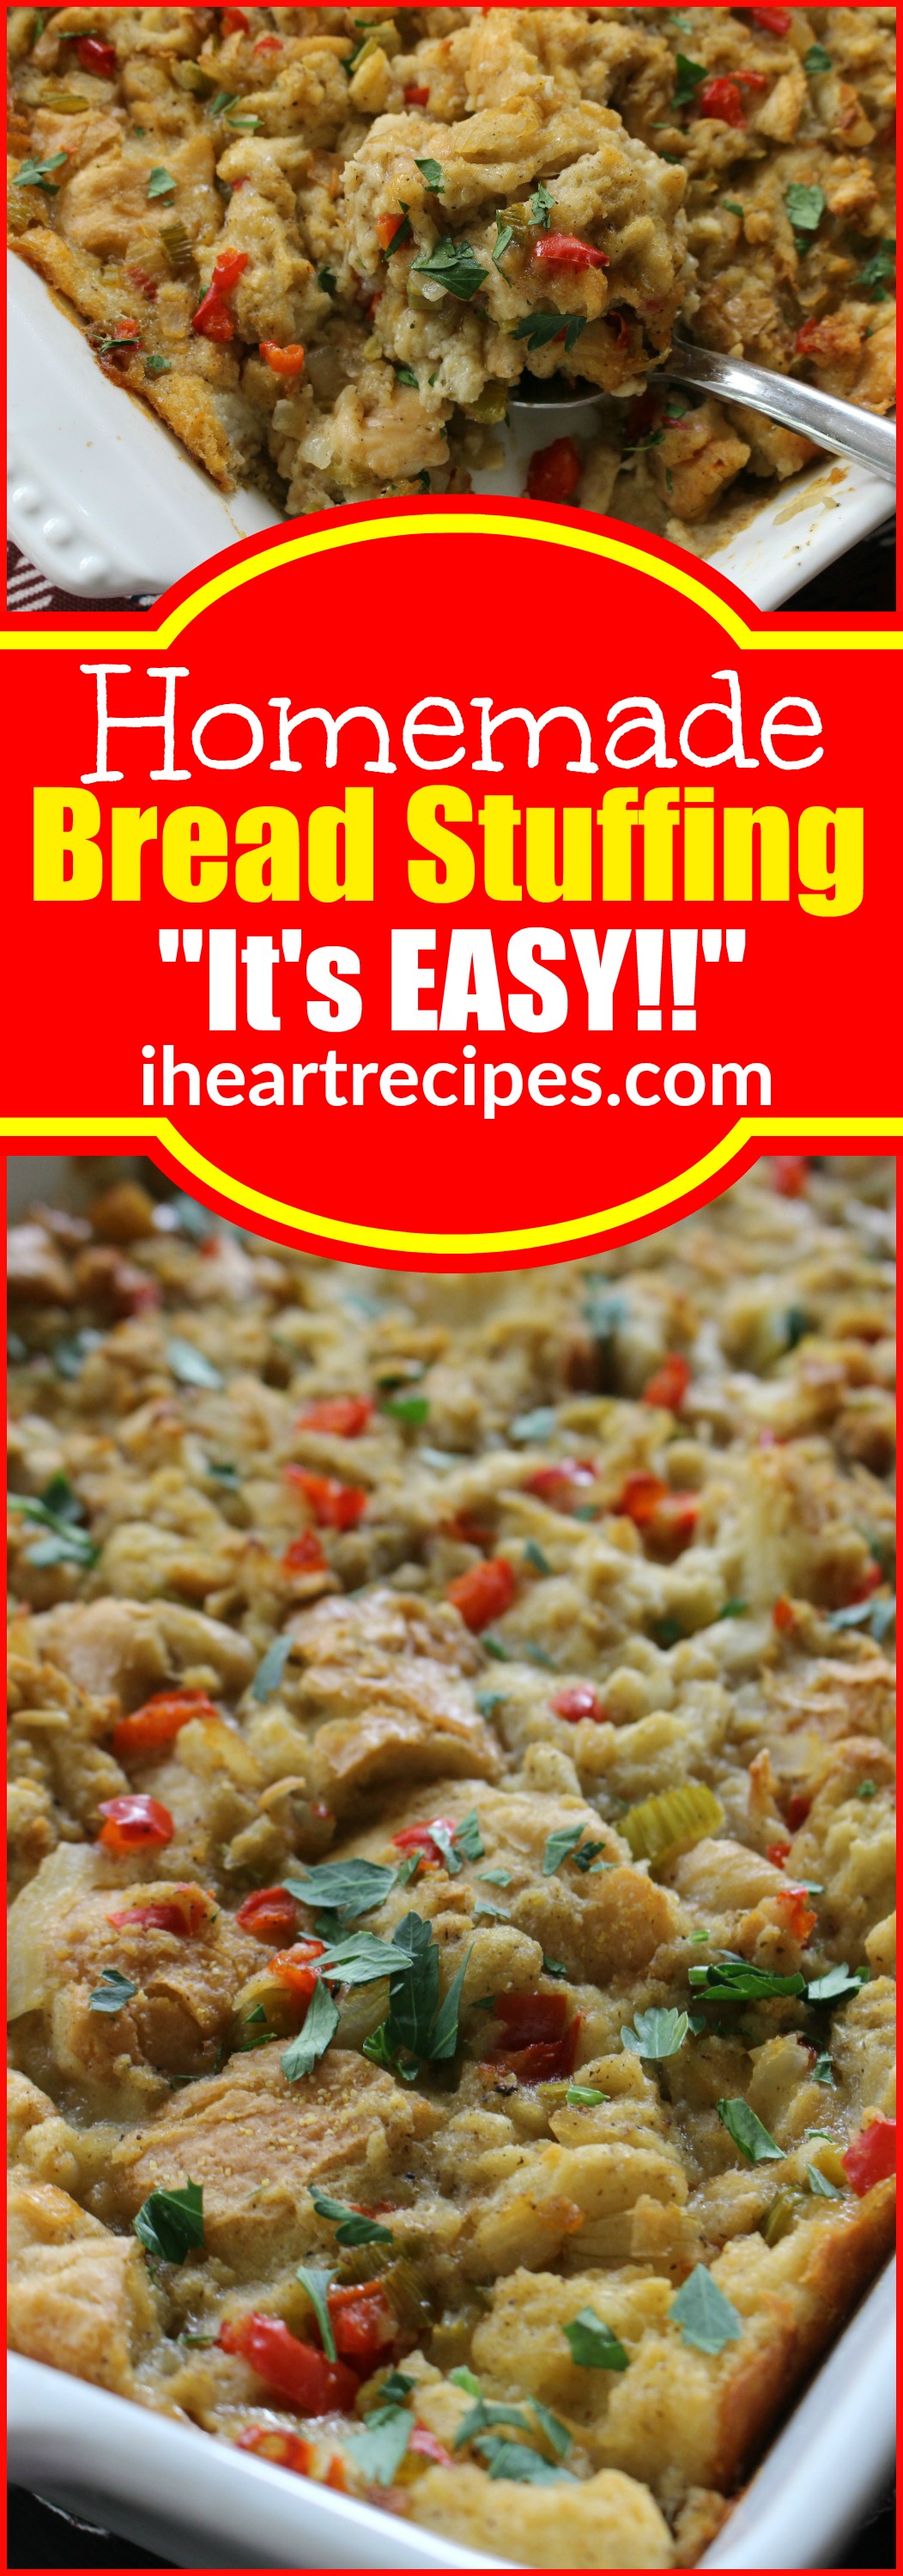 A Pinterest image collage made with two images of a homemade stuffing recipe made with French bread, veggies, herbs, and seasonings. Text across the top of the image says “homemade bread stuffing” and “It’s EASY!!!” on a red banner background.